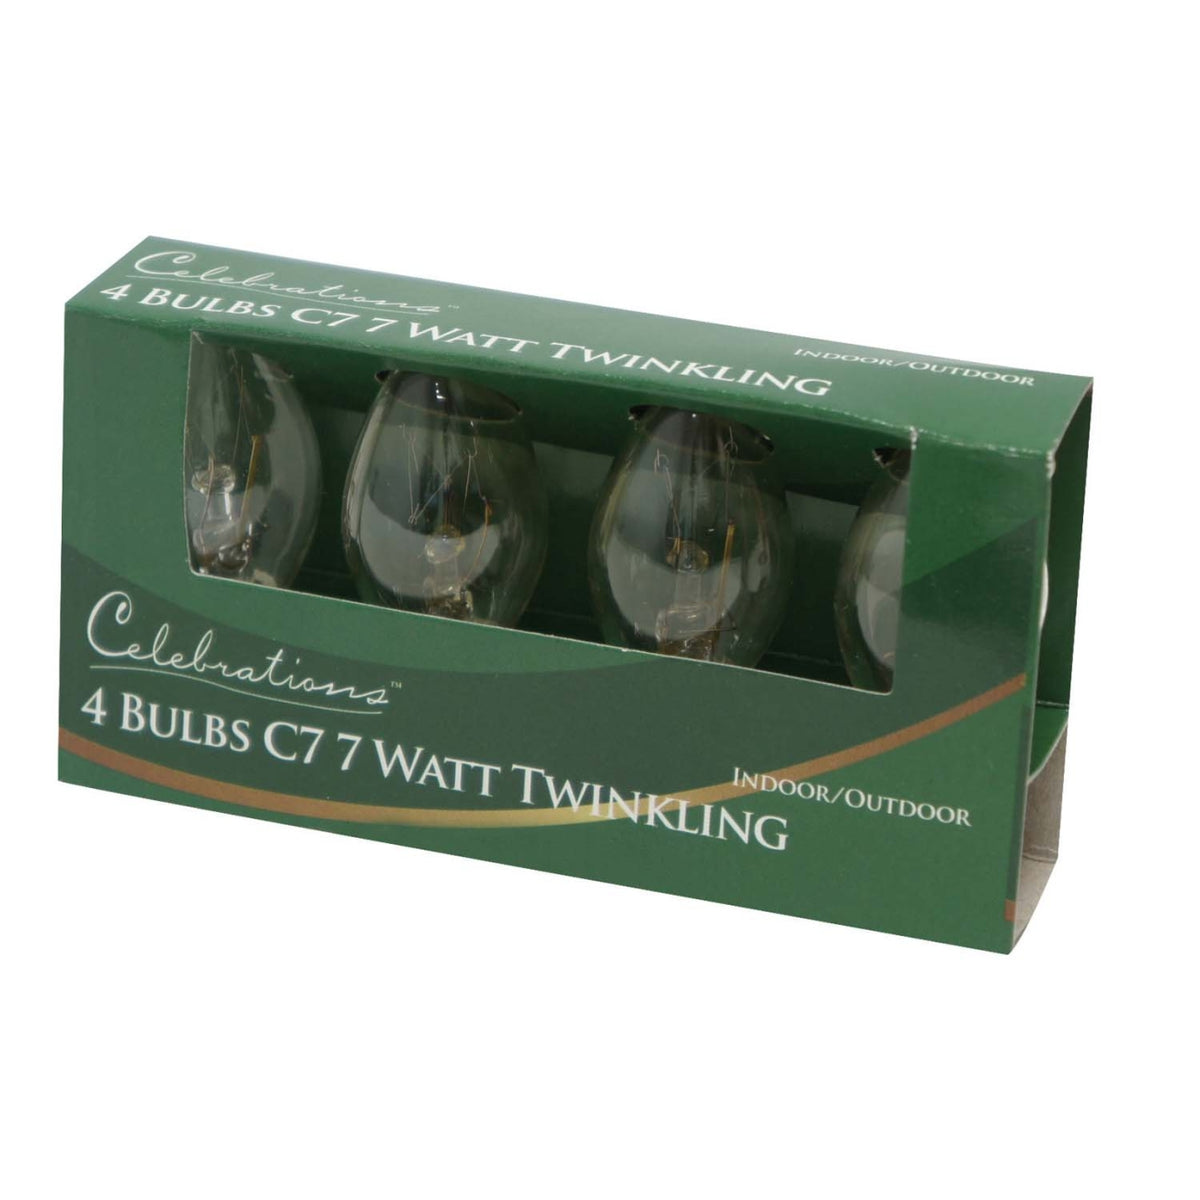 Celebrations UYRYL1A3 C7 Replacement Bulbs, 7 W, Twinkle, Clear